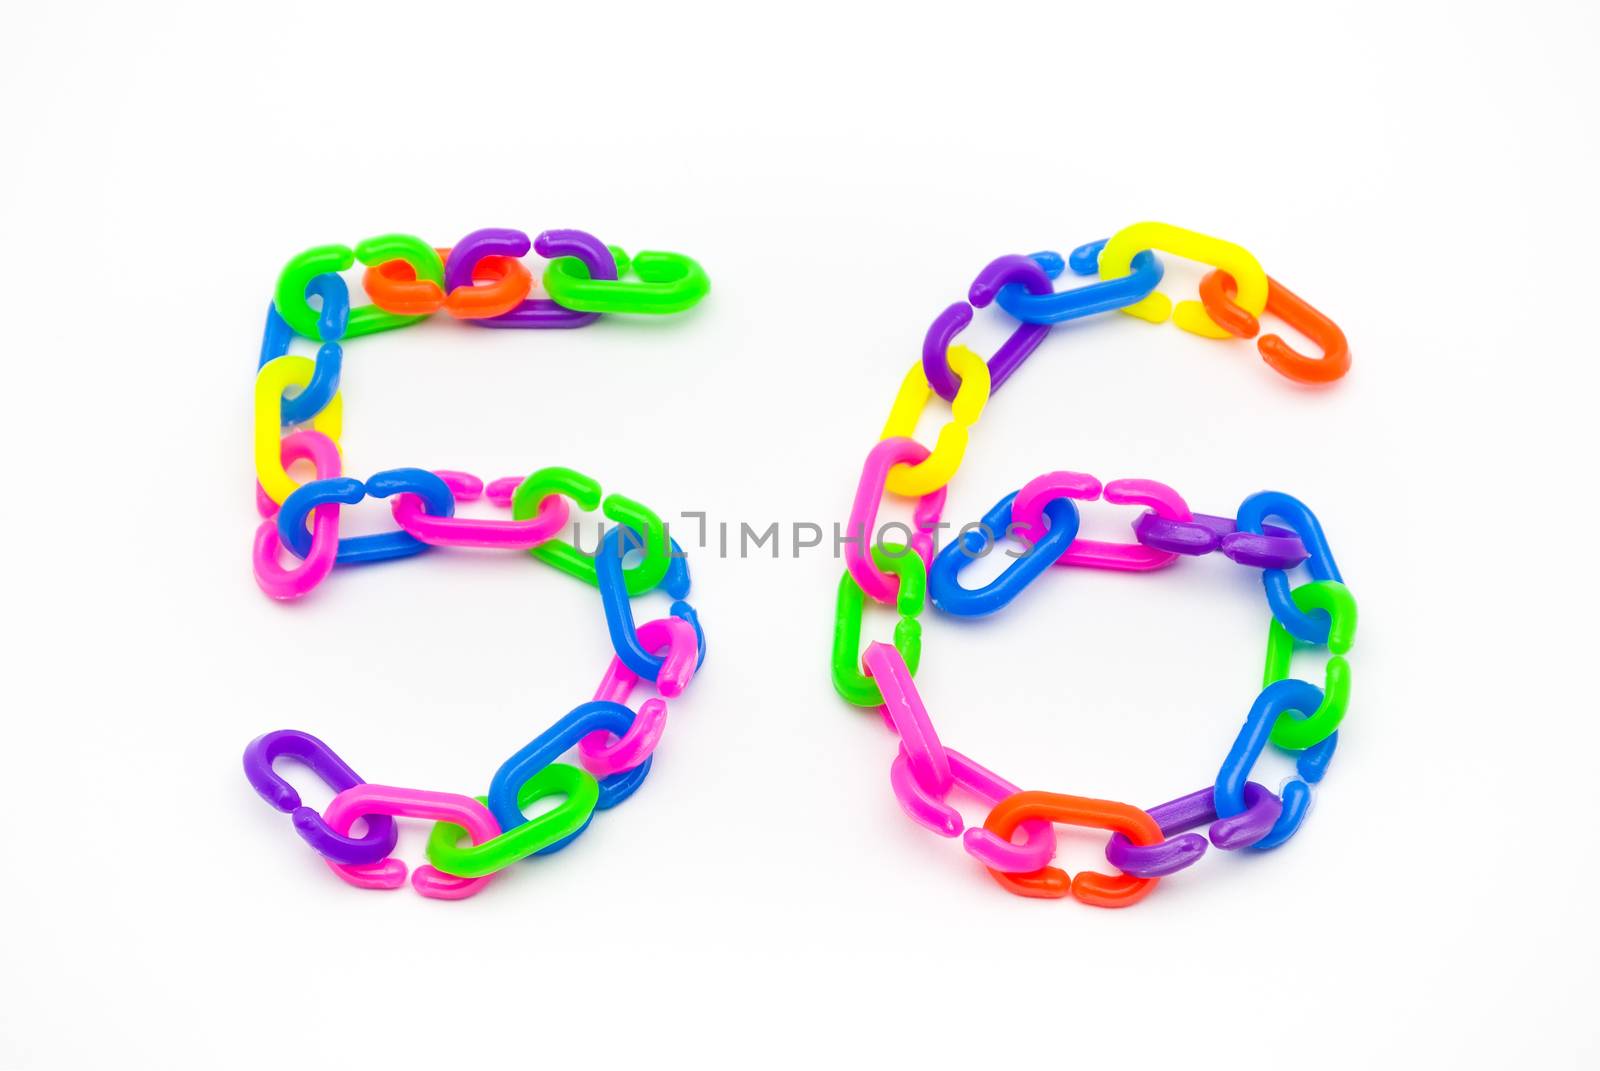 5 and 6 Number, Created by Colorful Plastic Chain.